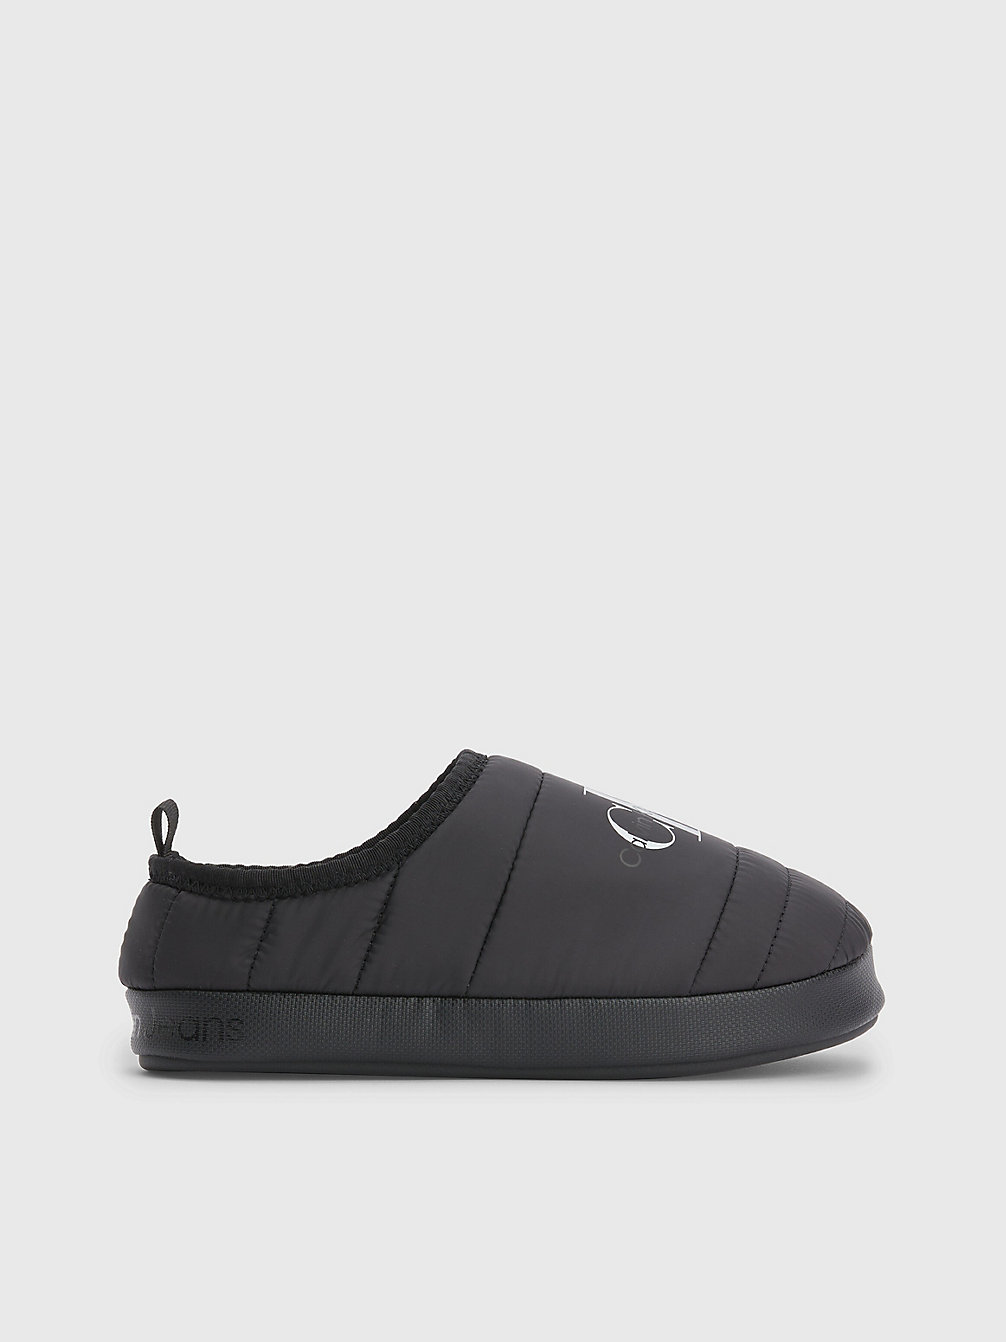 Pantofole Trapuntate Riciclate > BLACK > undefined donna > Calvin Klein